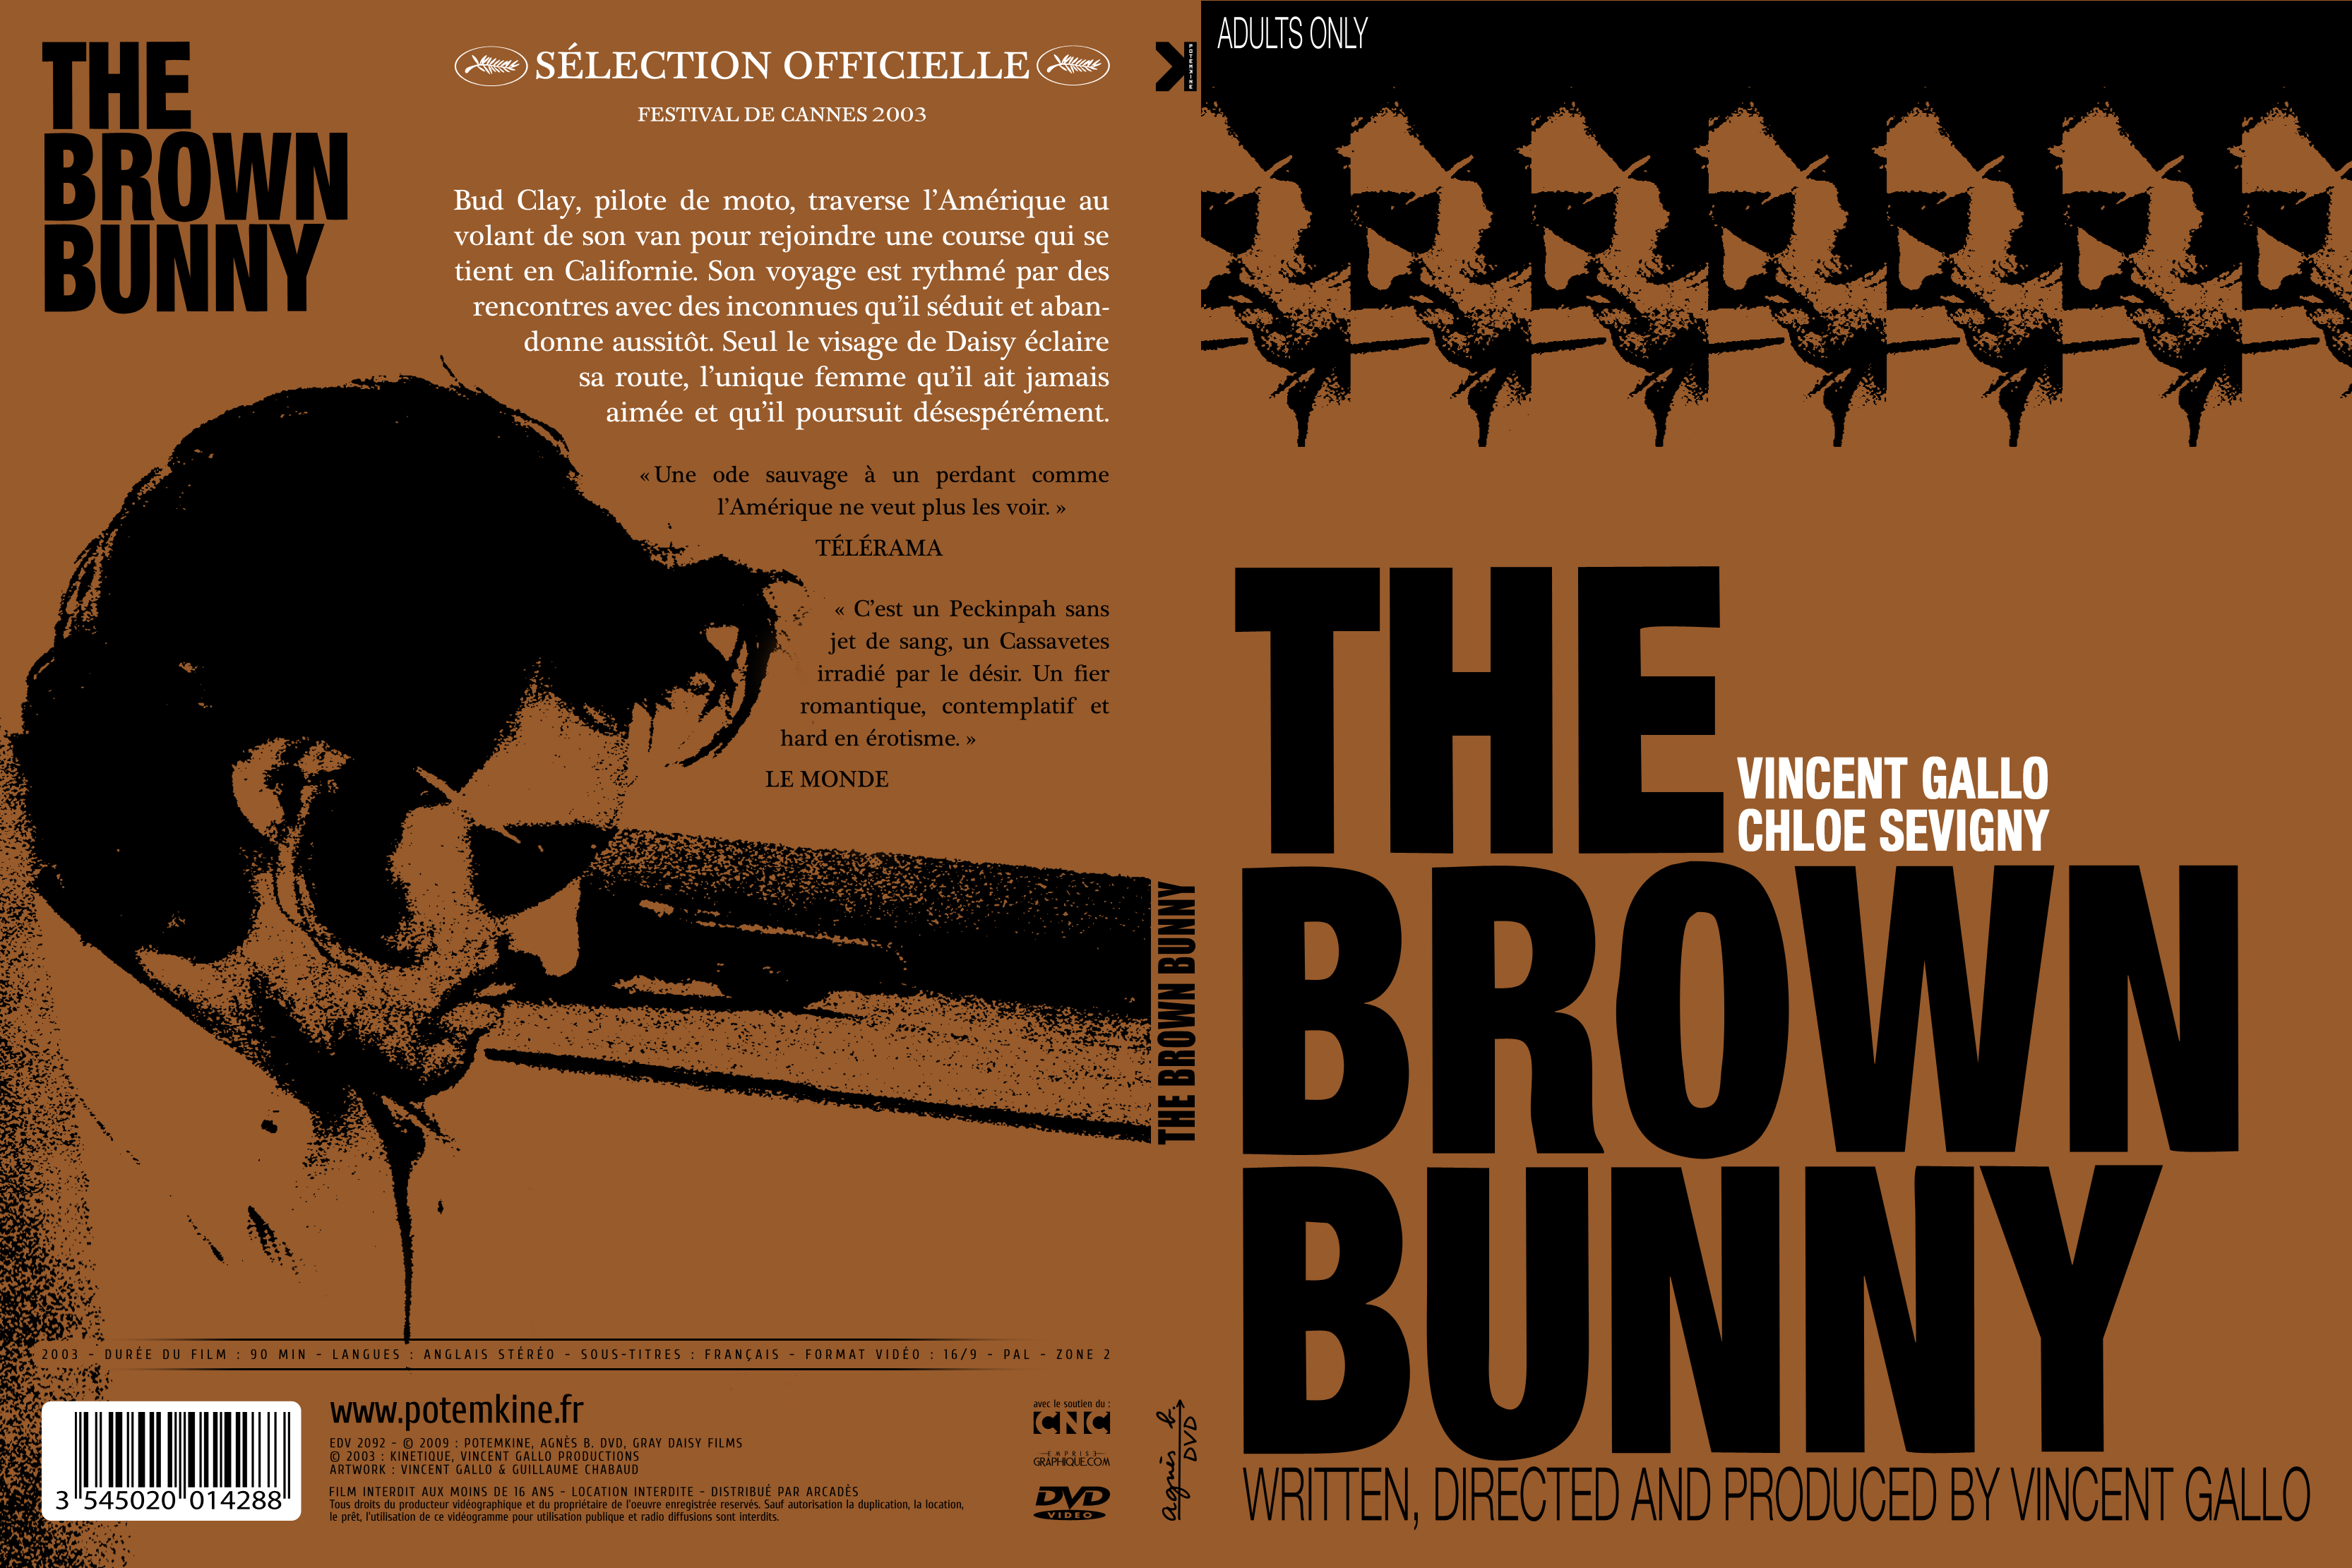 Jaquette DVD The brown bunny